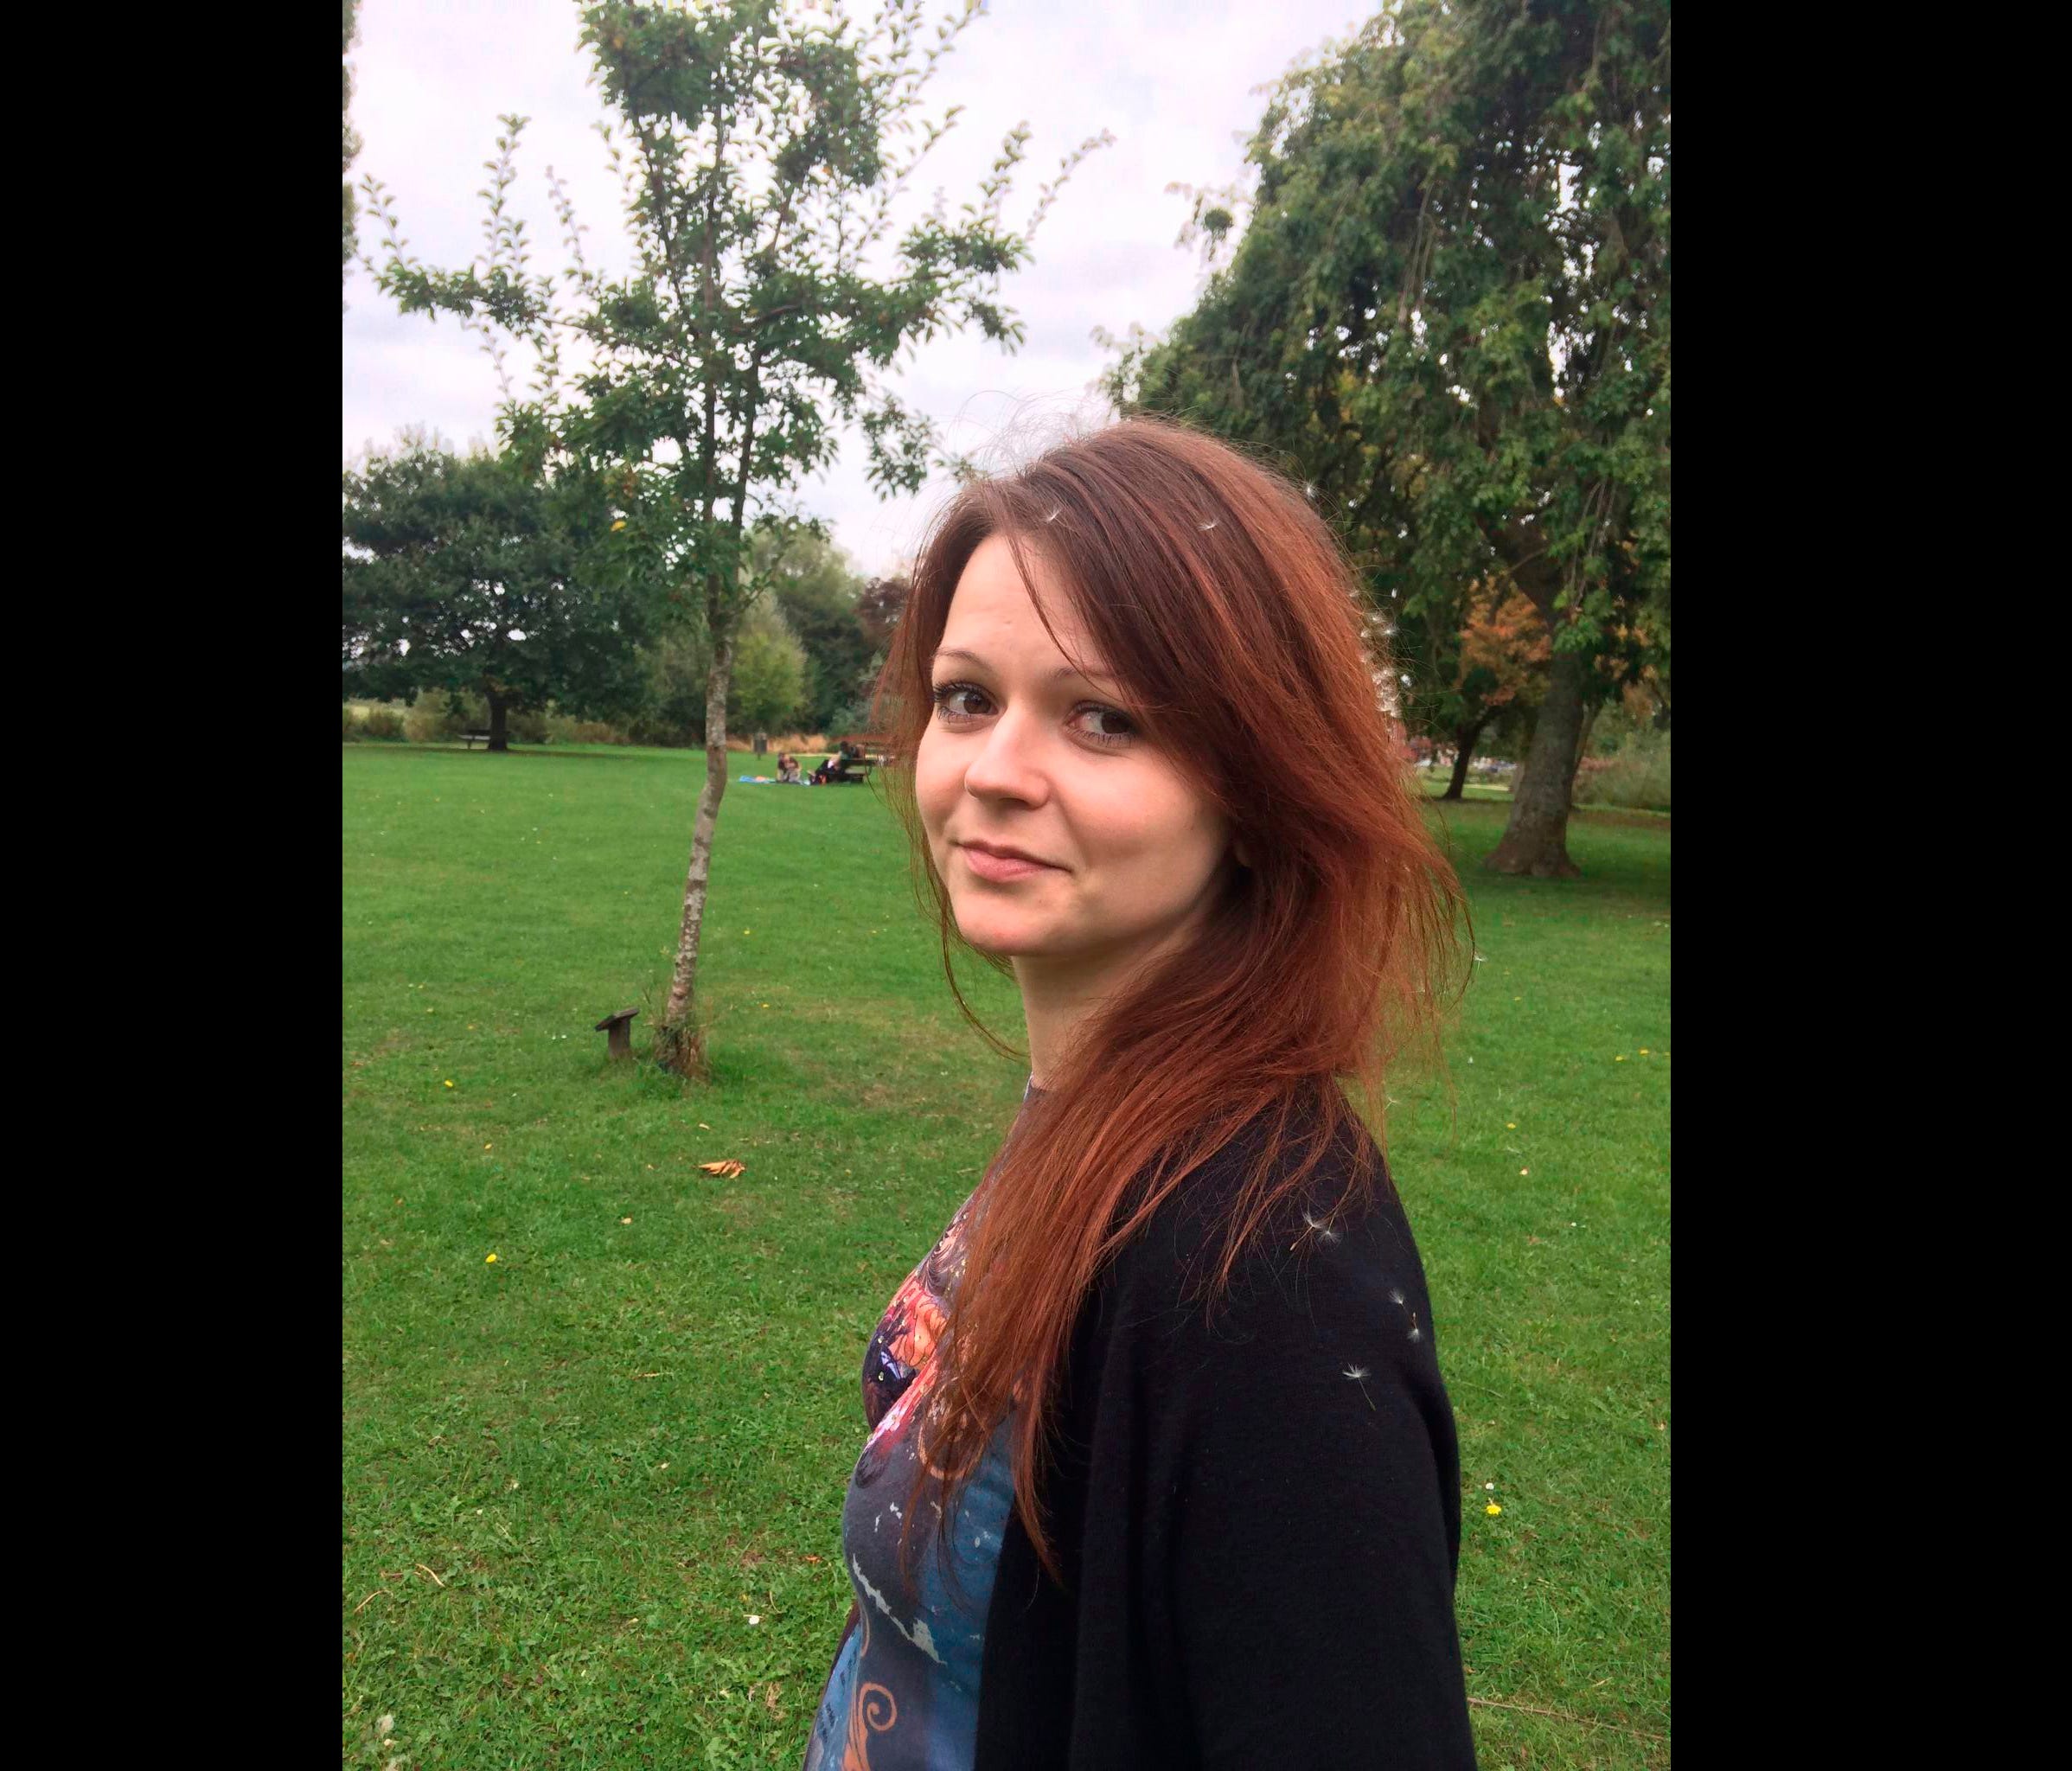 This is a file image of the daughter of former Russian Spy Sergei Skripal, Yulia Skripal taken from Yulia Skipal's Facebook account on March 6, 2018.